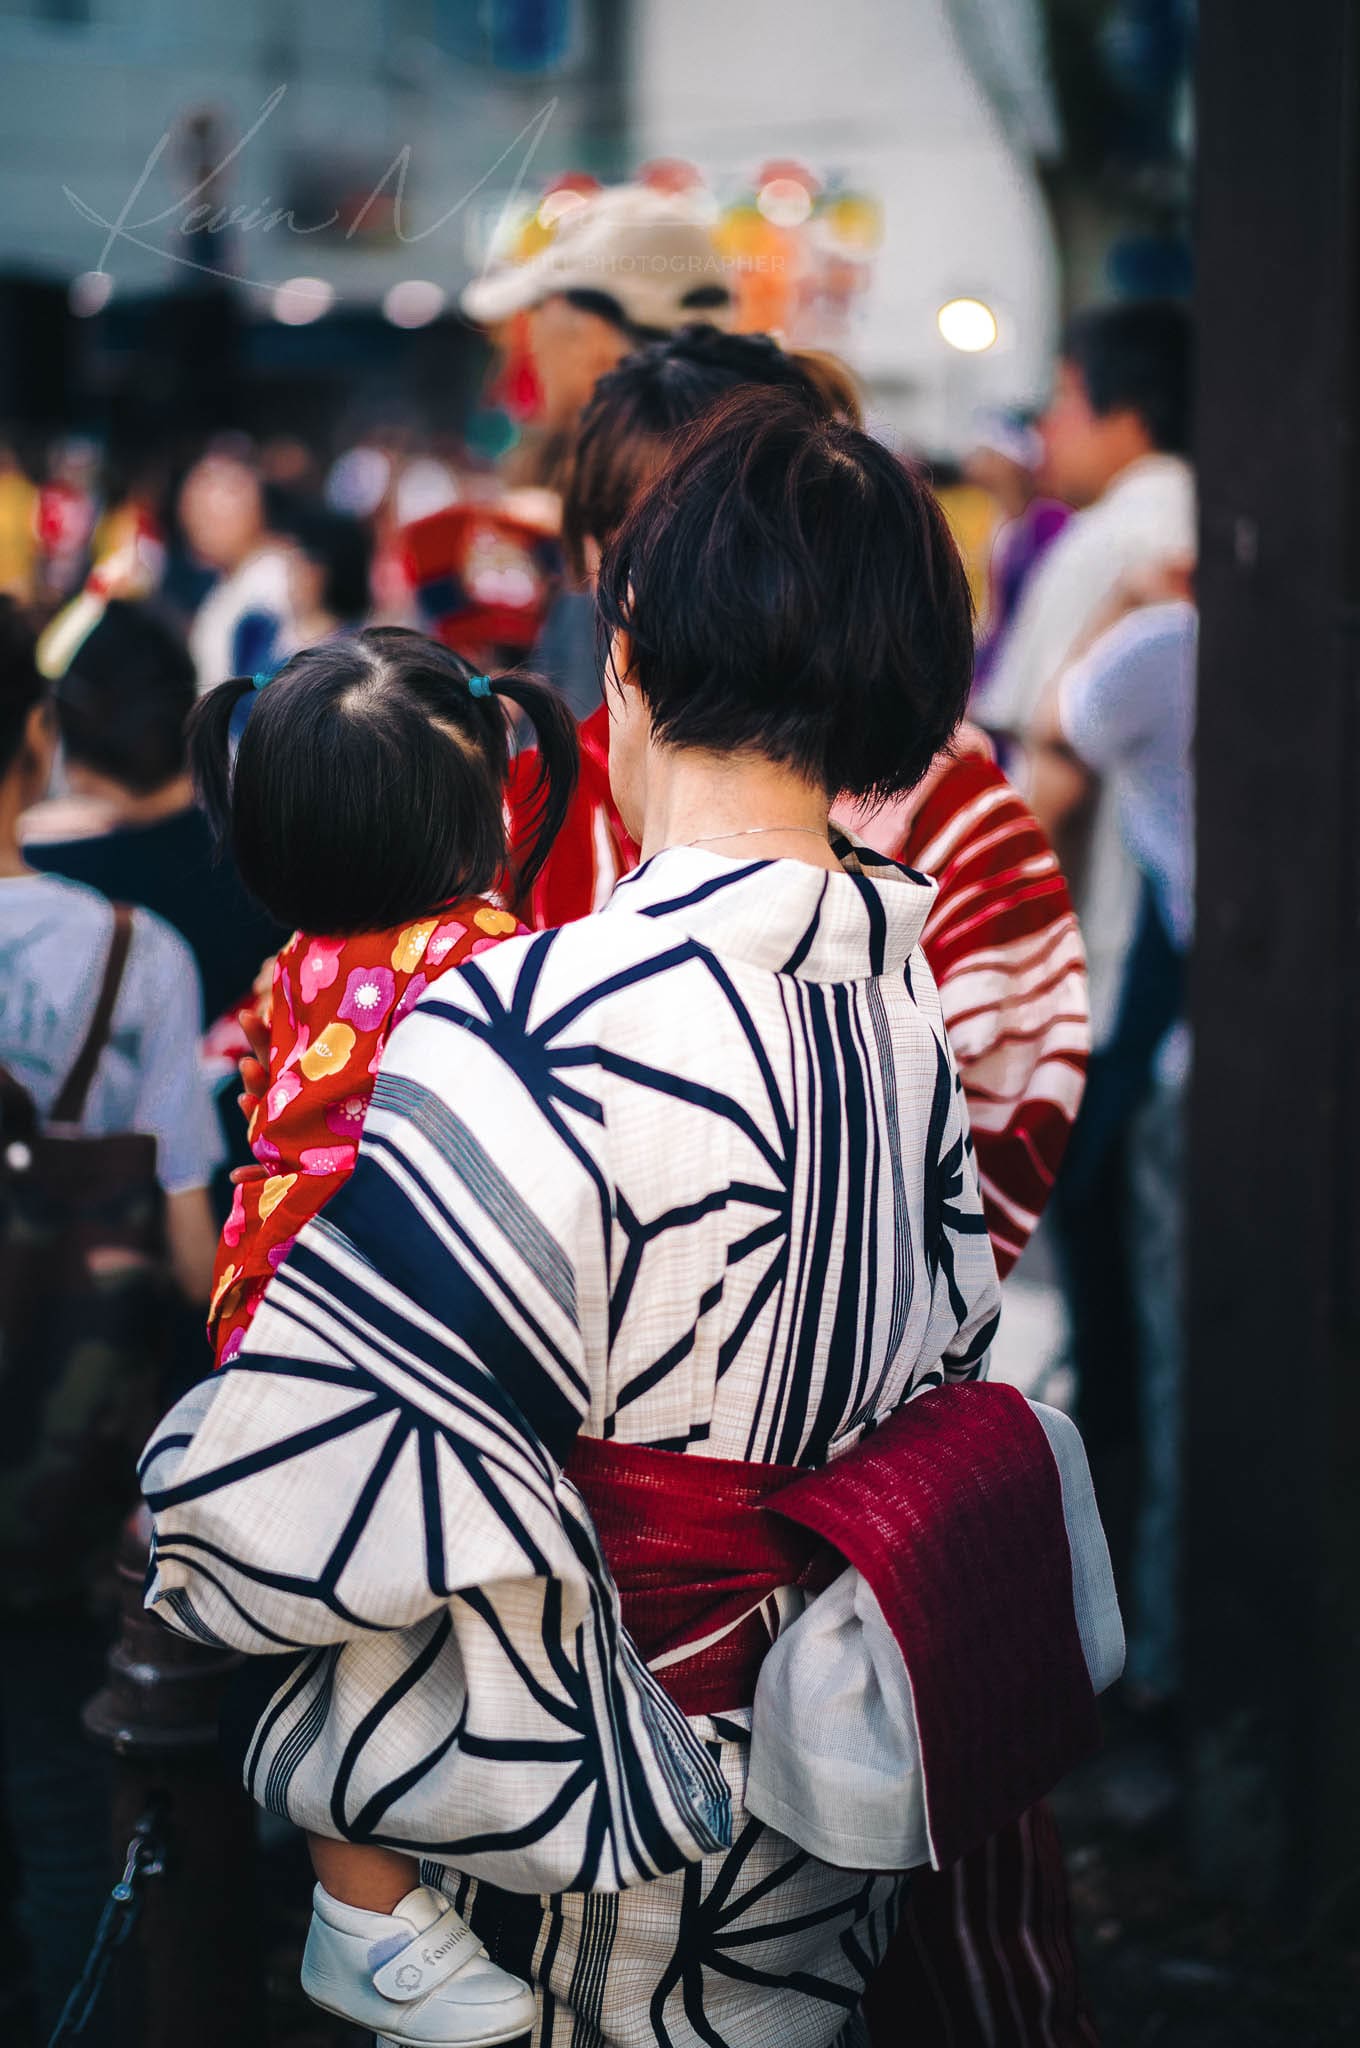 Adult and child in traditional attire sharing a moment at a Japanese summer festival.